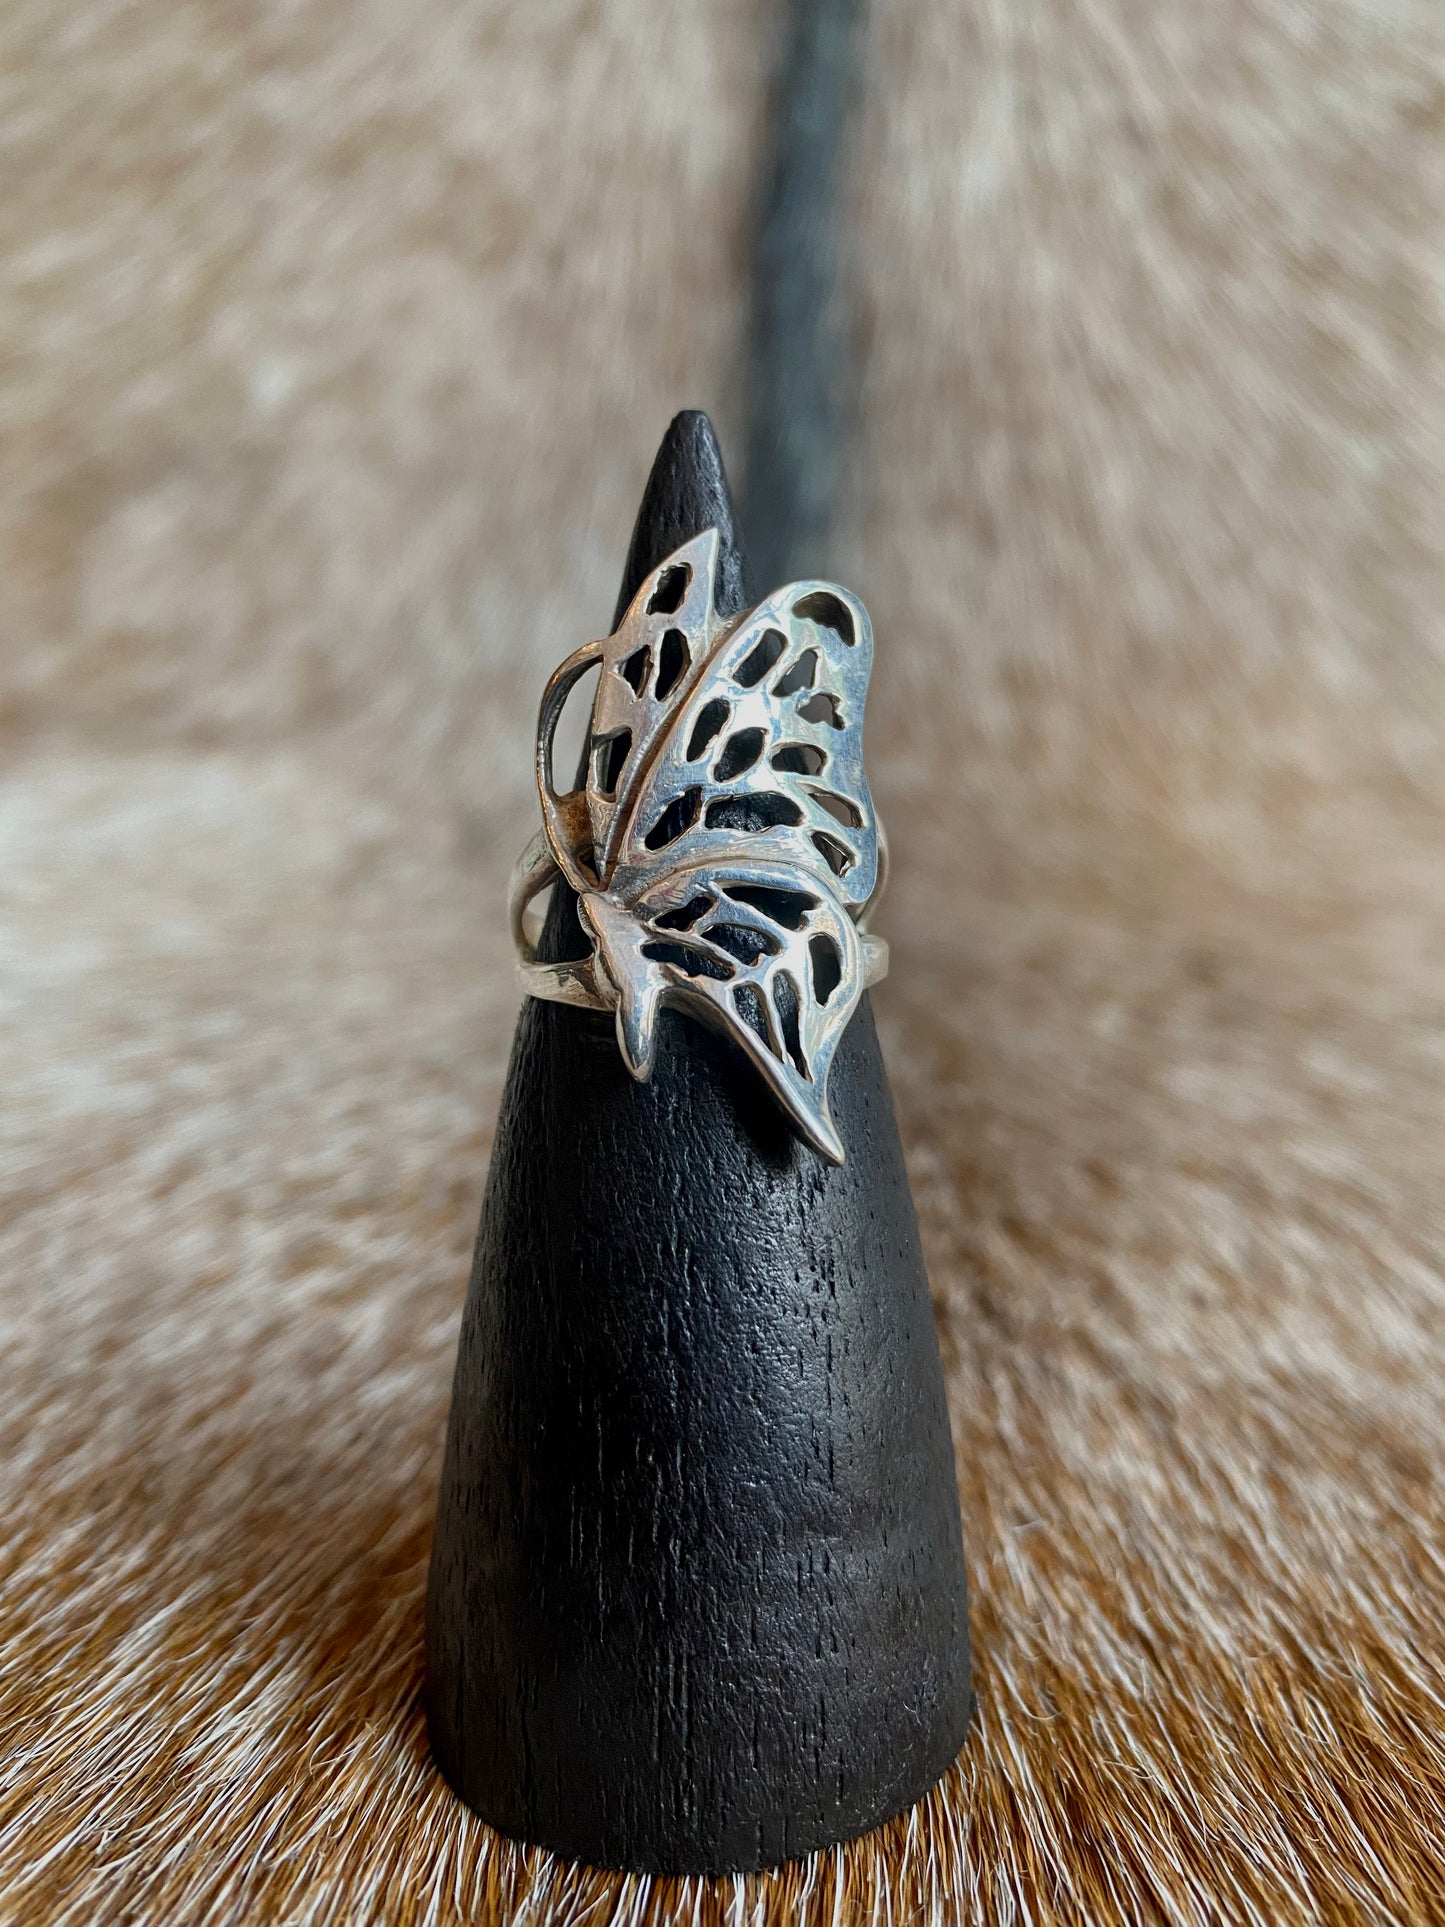 Vintage Sterling Silver Butterfly Ring